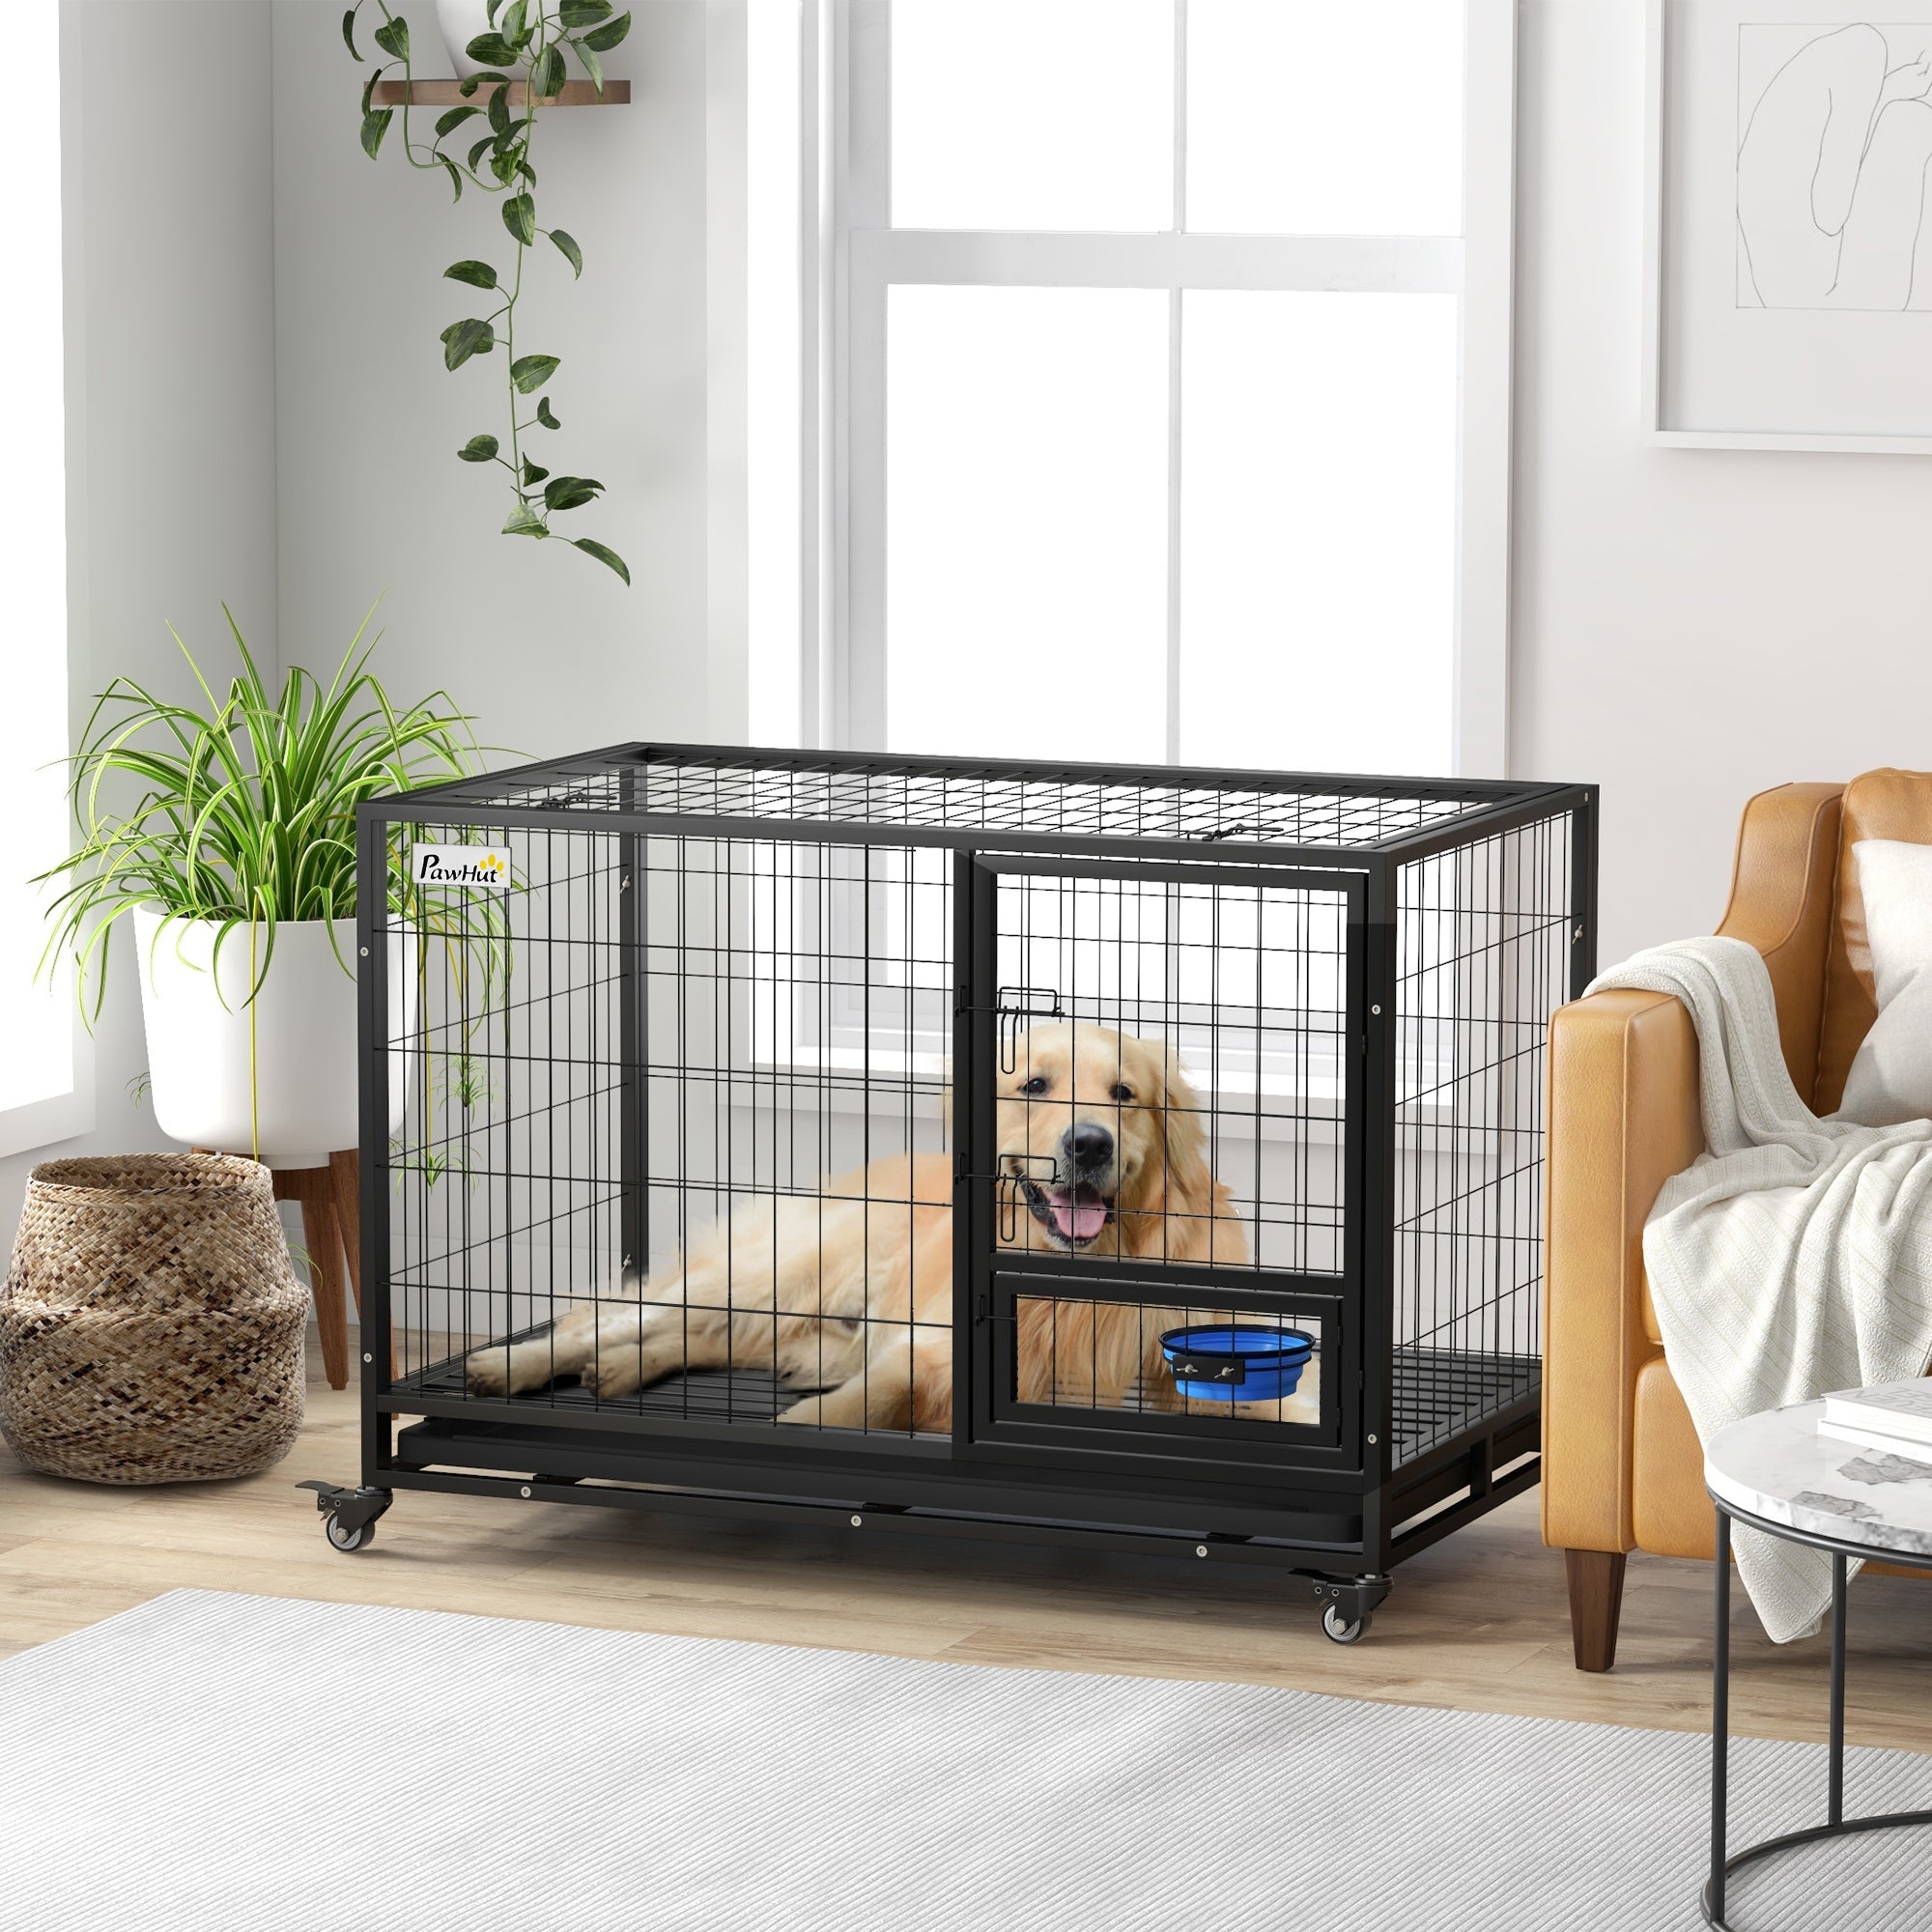 48" Heavy Duty Dog Crate on Wheels w/ Bowl Holder, Removable Tray, Detachable Top, Double Doors for L, XL Dogs-1